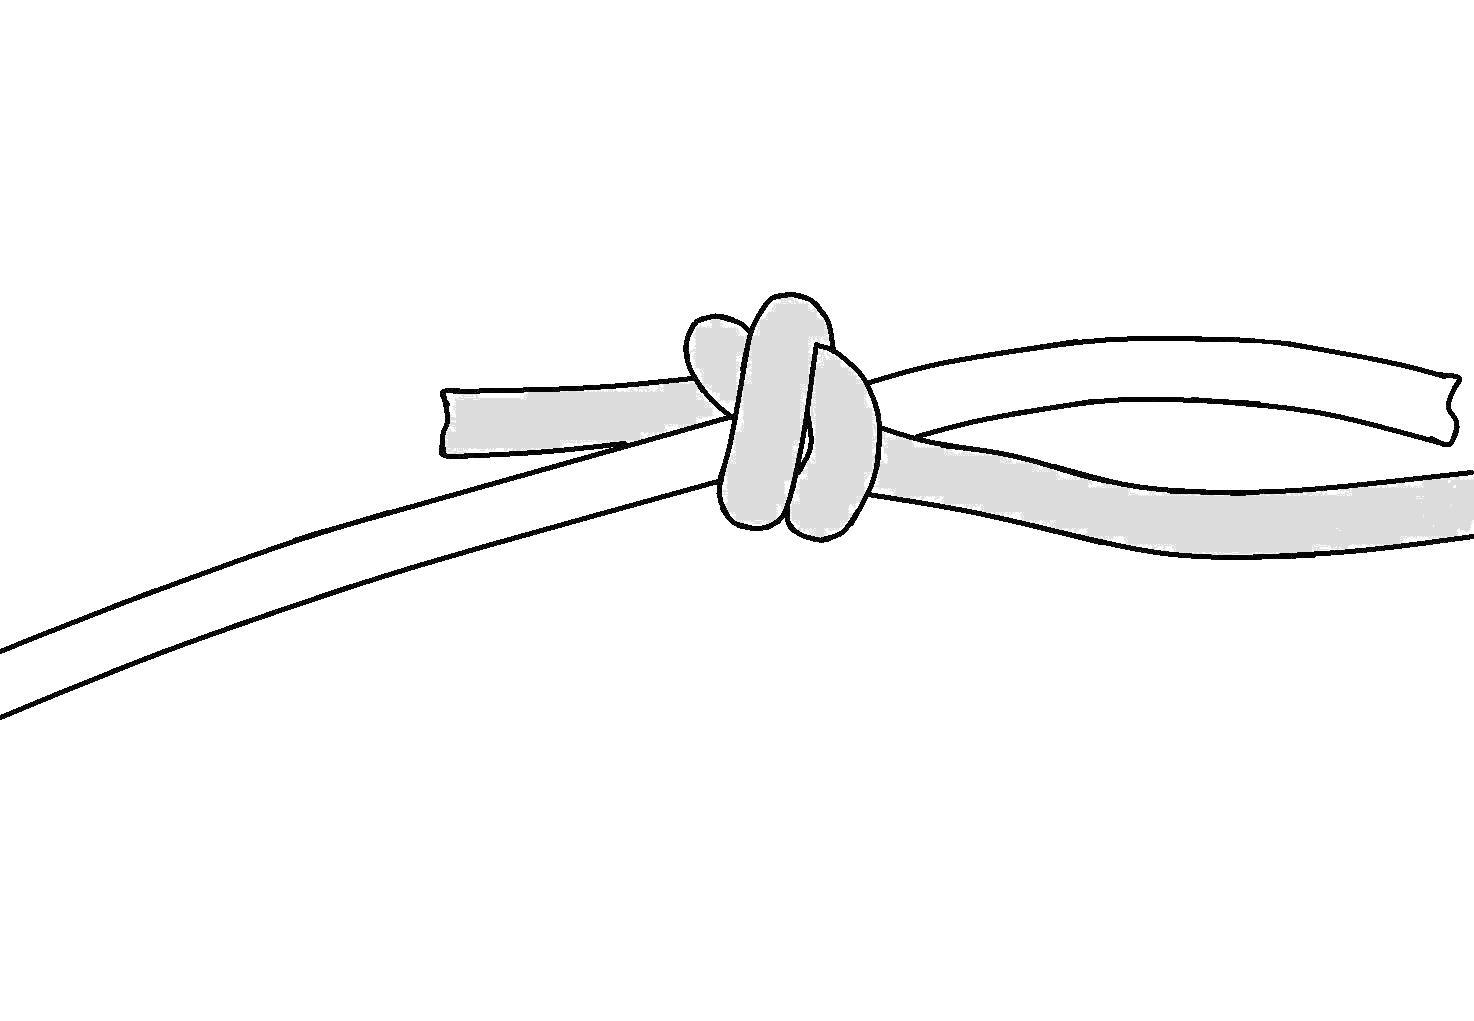 New Approaches with Knot Tying: Making The Fisherman's Knot with the  Contour of Your Hand